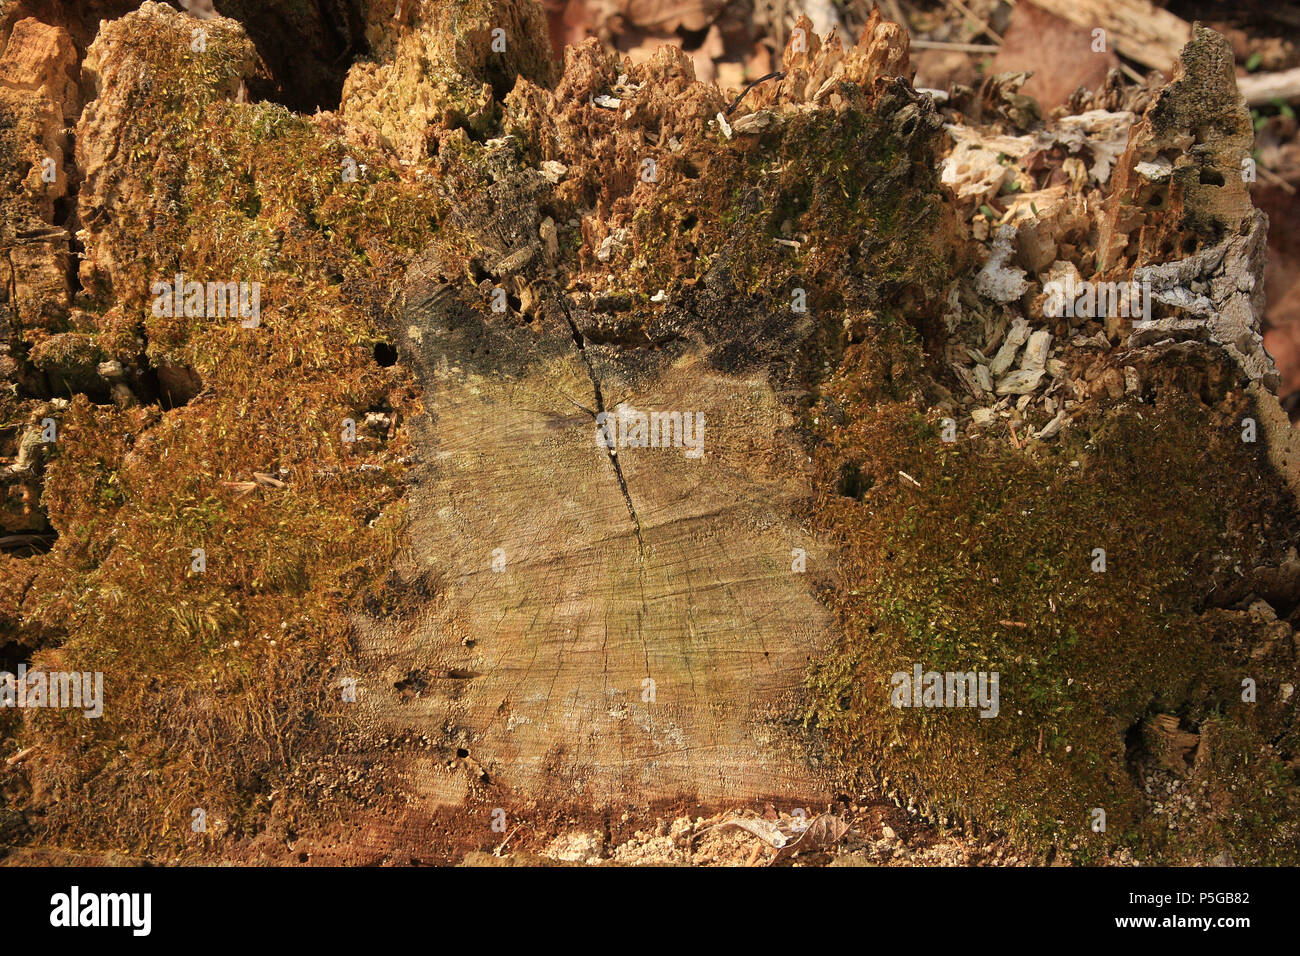 Close view of rotten tissue in cut tree trunk Stock Photo